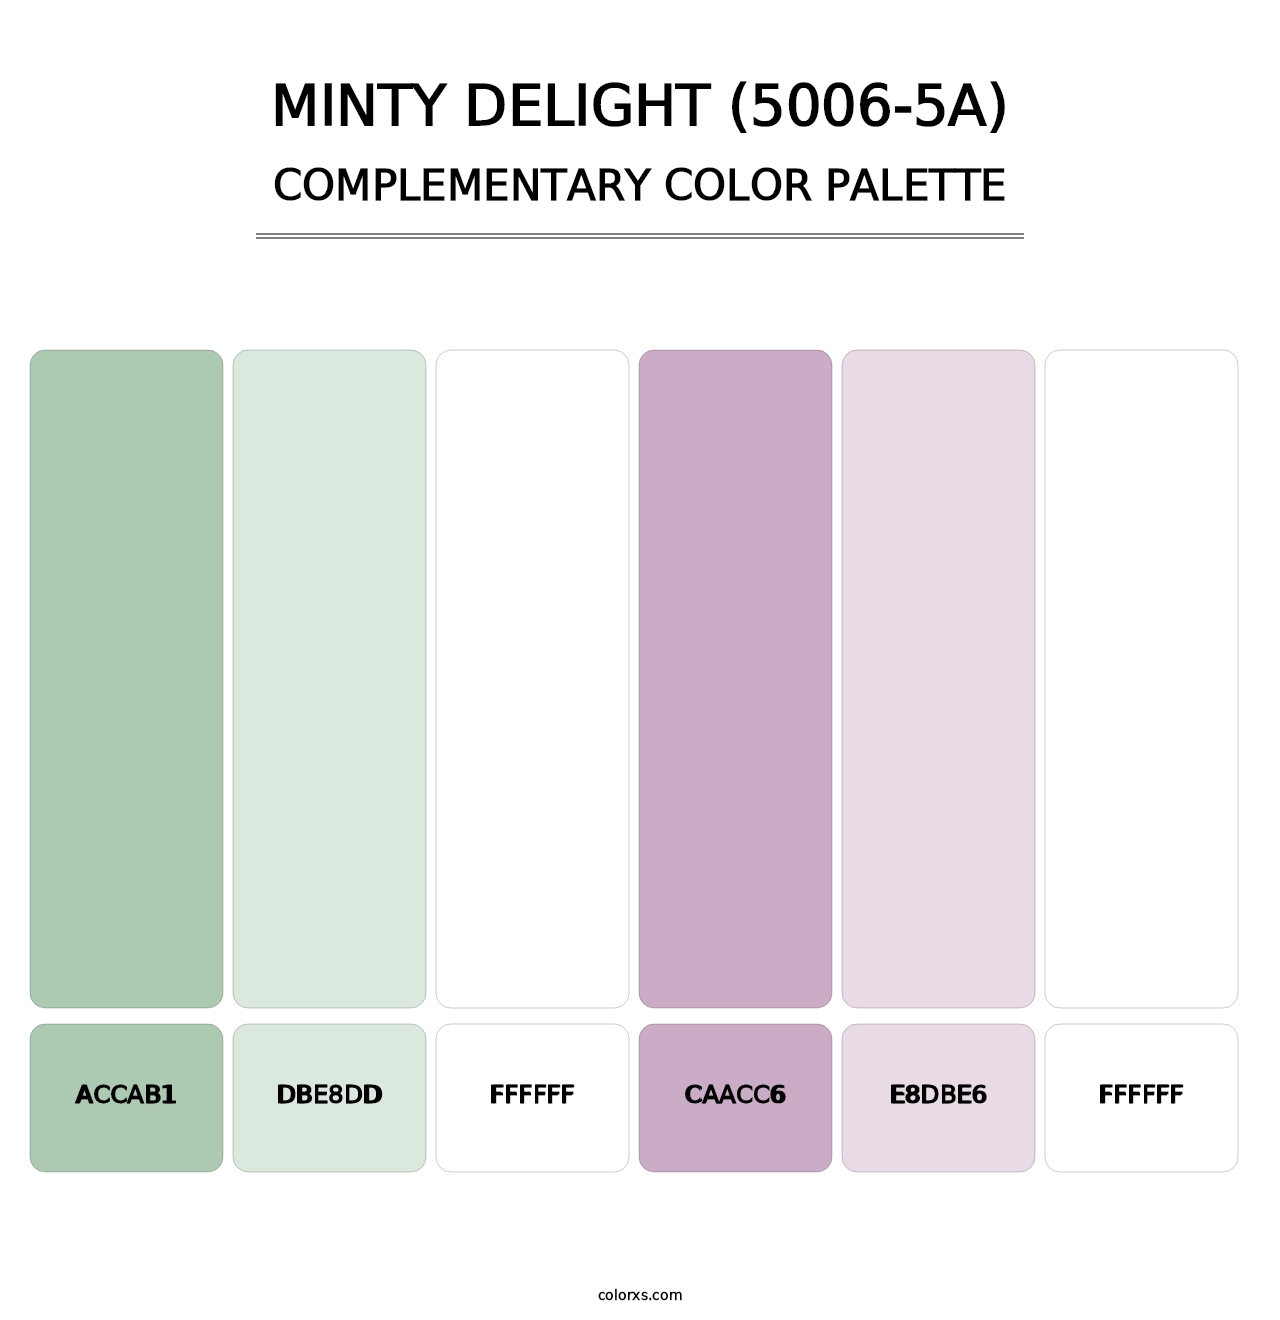 Minty Delight (5006-5A) - Complementary Color Palette